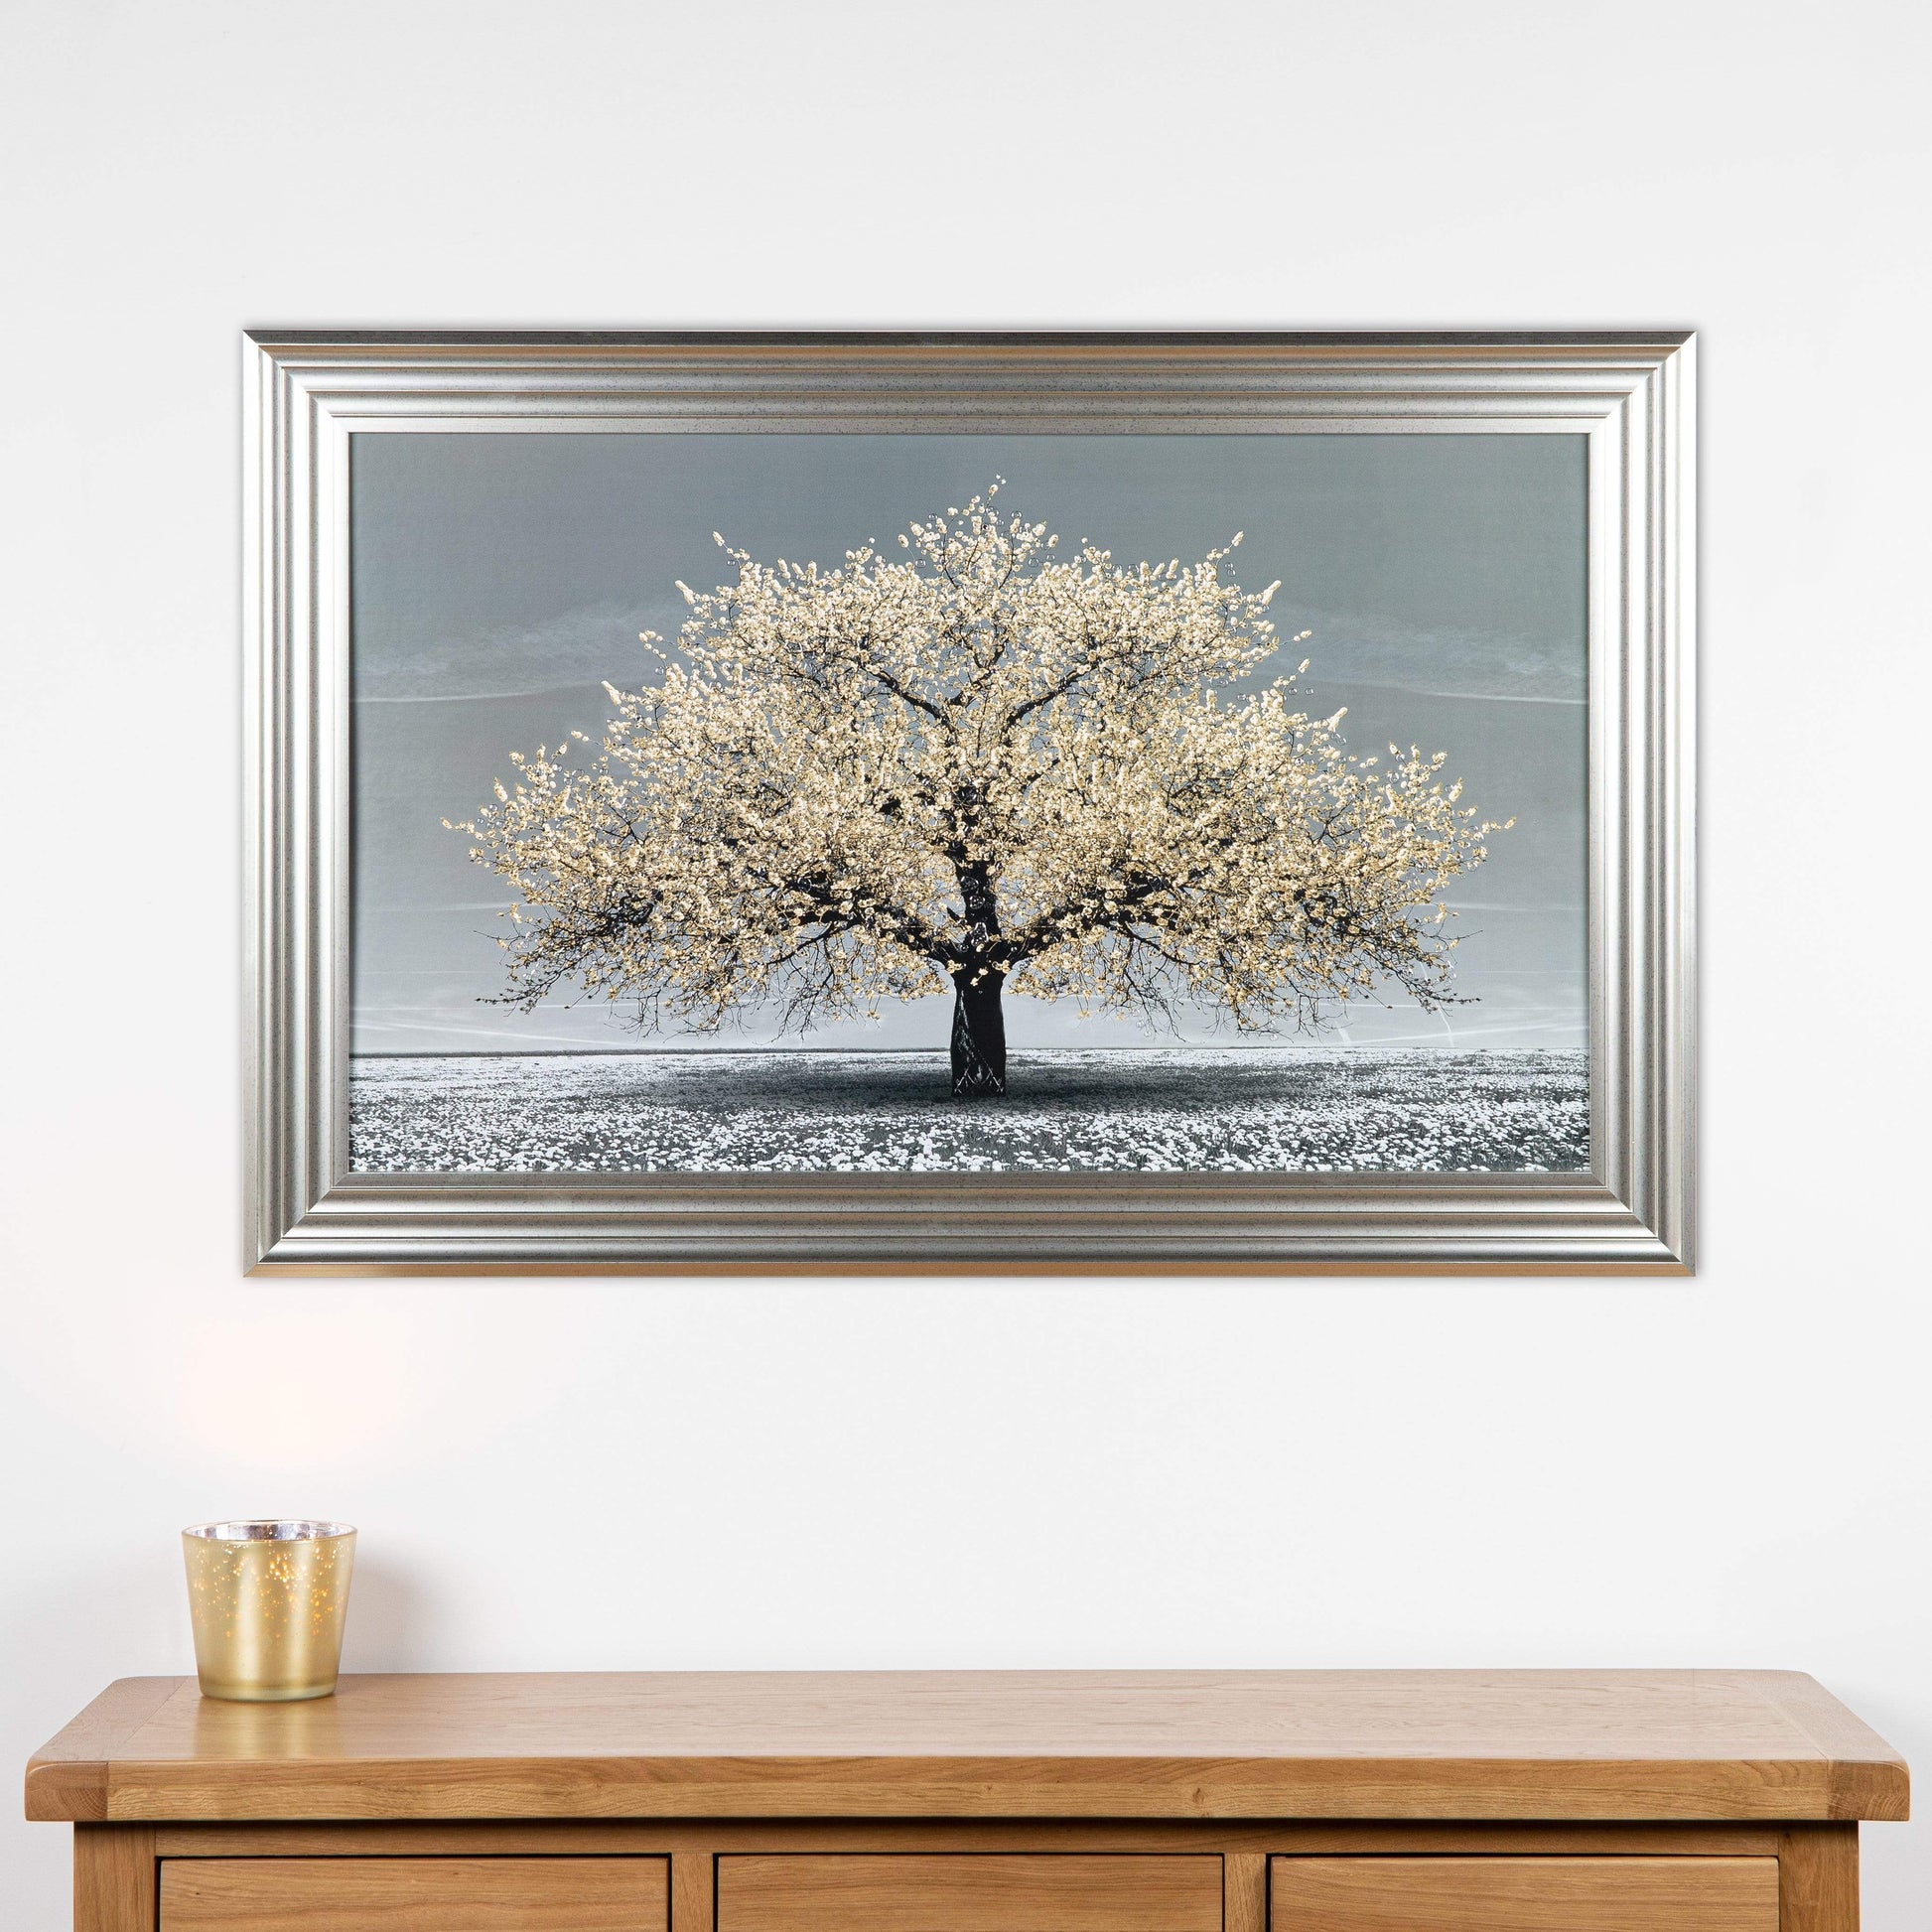 Pictures  -  Shh Champagne Cherry Tree Framed Picture  -  50155647